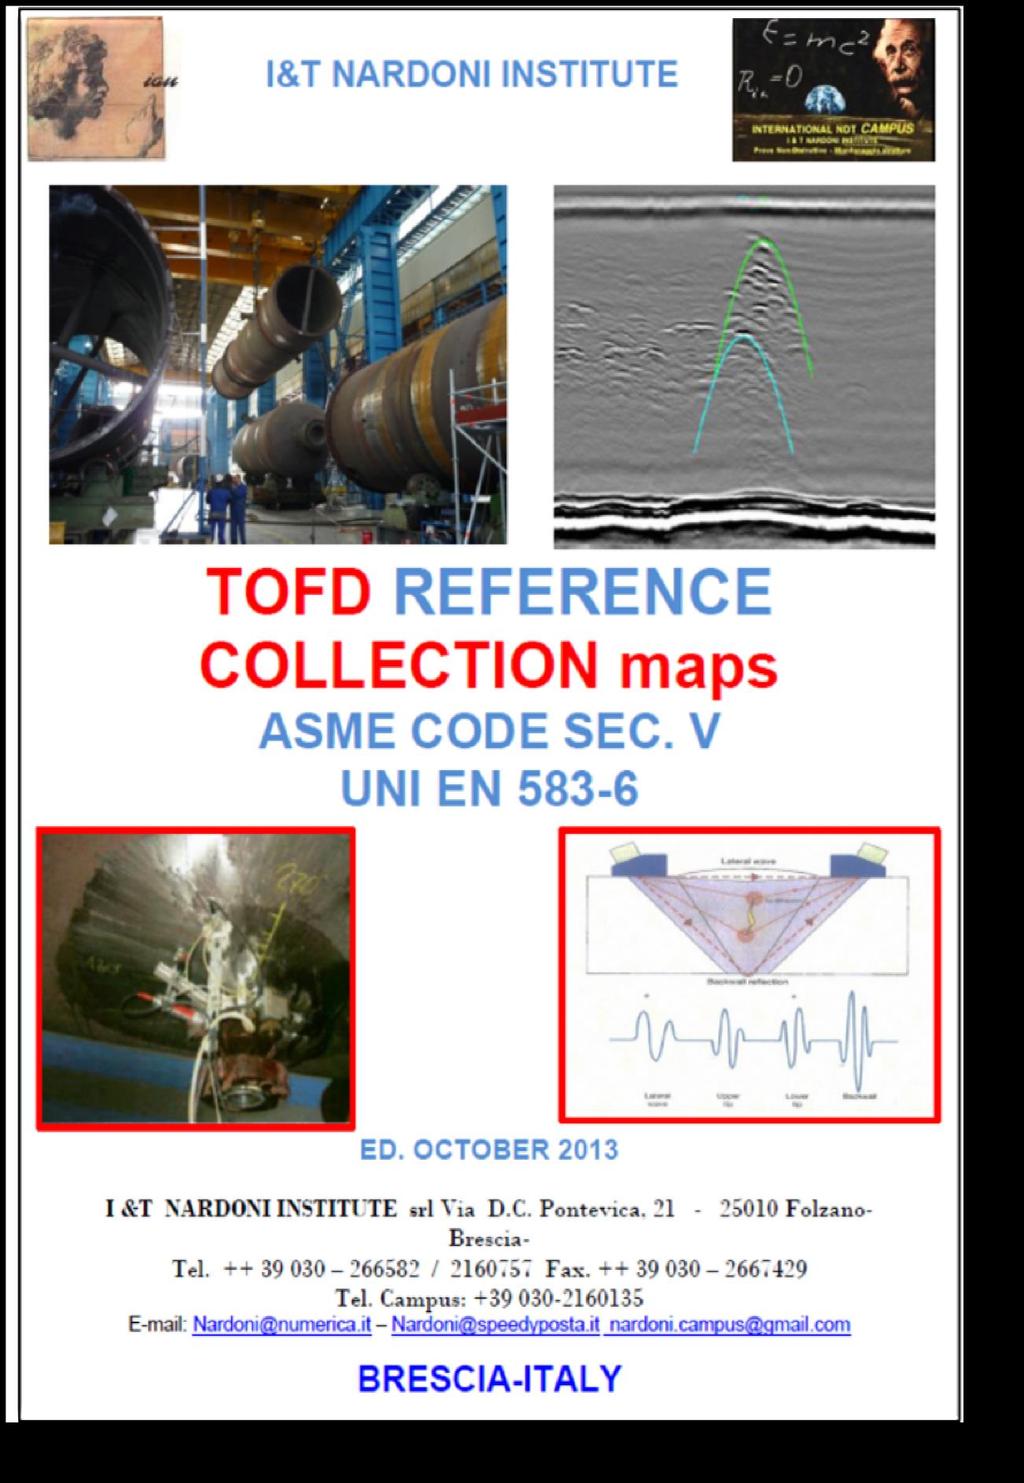 HANDBOOK OF TOFD MAPS more than 100 TOFD maps for different